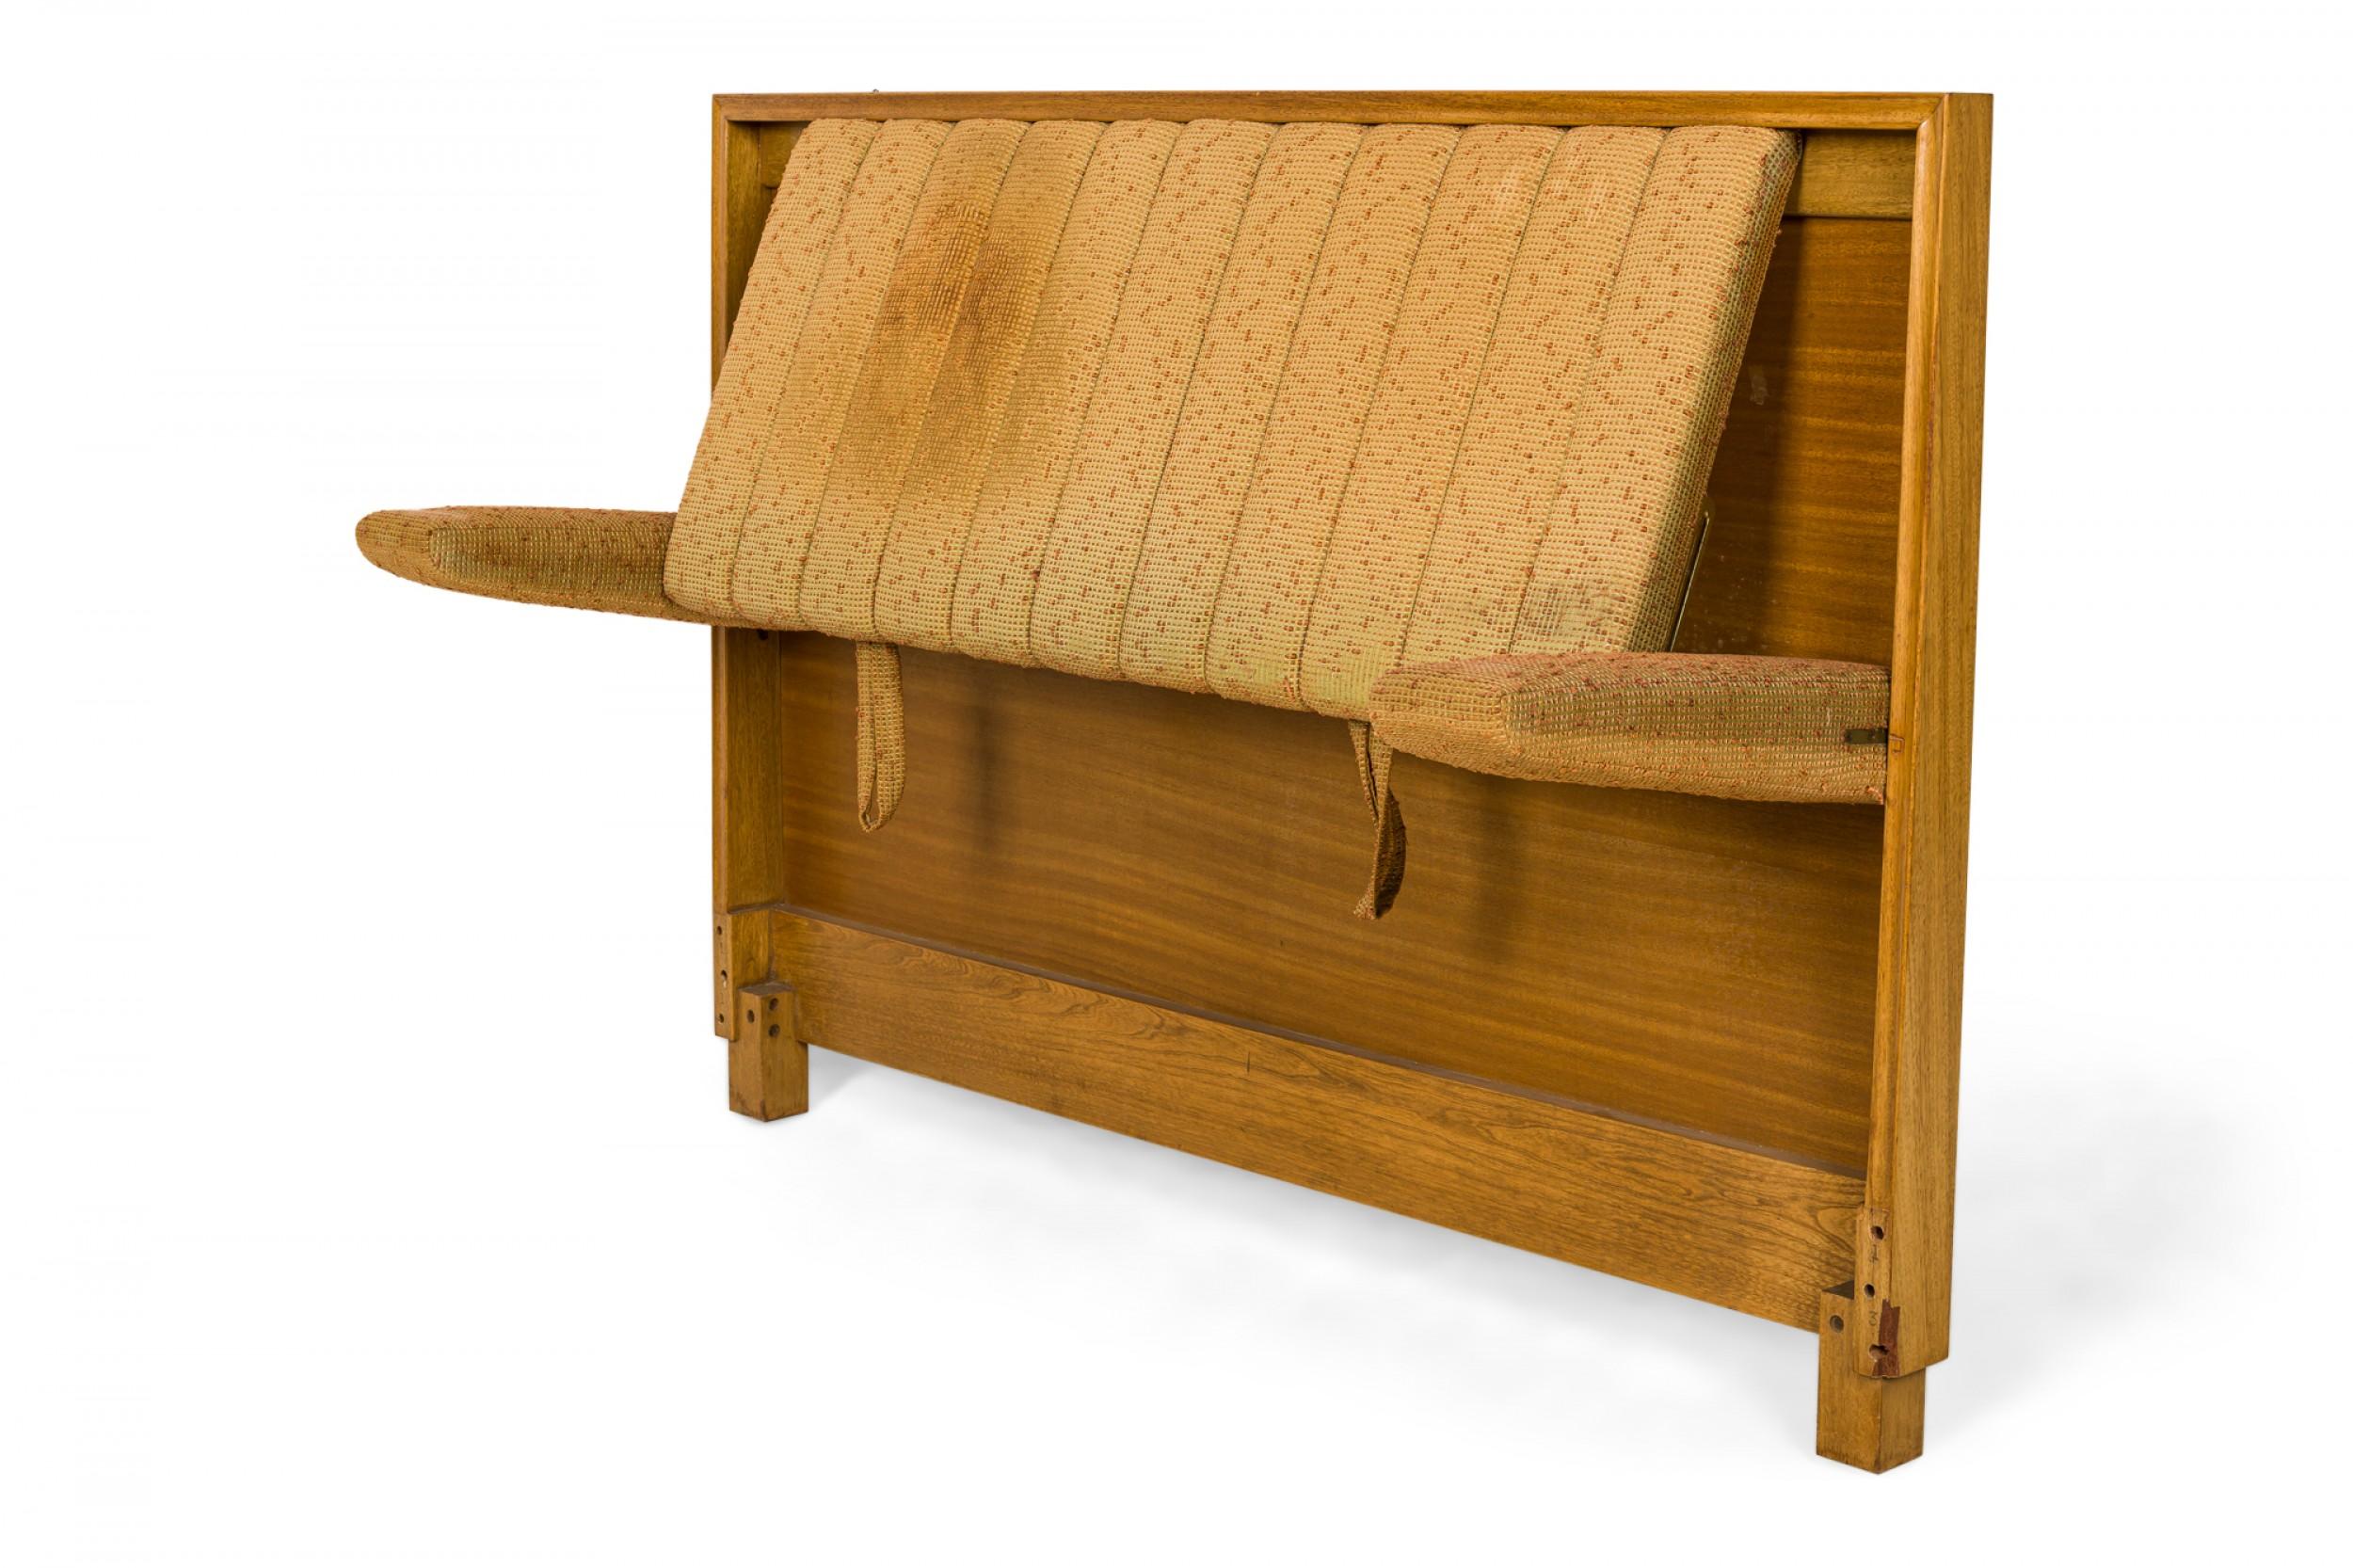 American Mid-Century single bed headboard with a walnut frame and beige and red textured fabric channeled upholstered center panel, which pivots outward as a backrest, flanked on either side by two fold down arms. (EDWARD WORMLEY FOR DUNBAR).
 